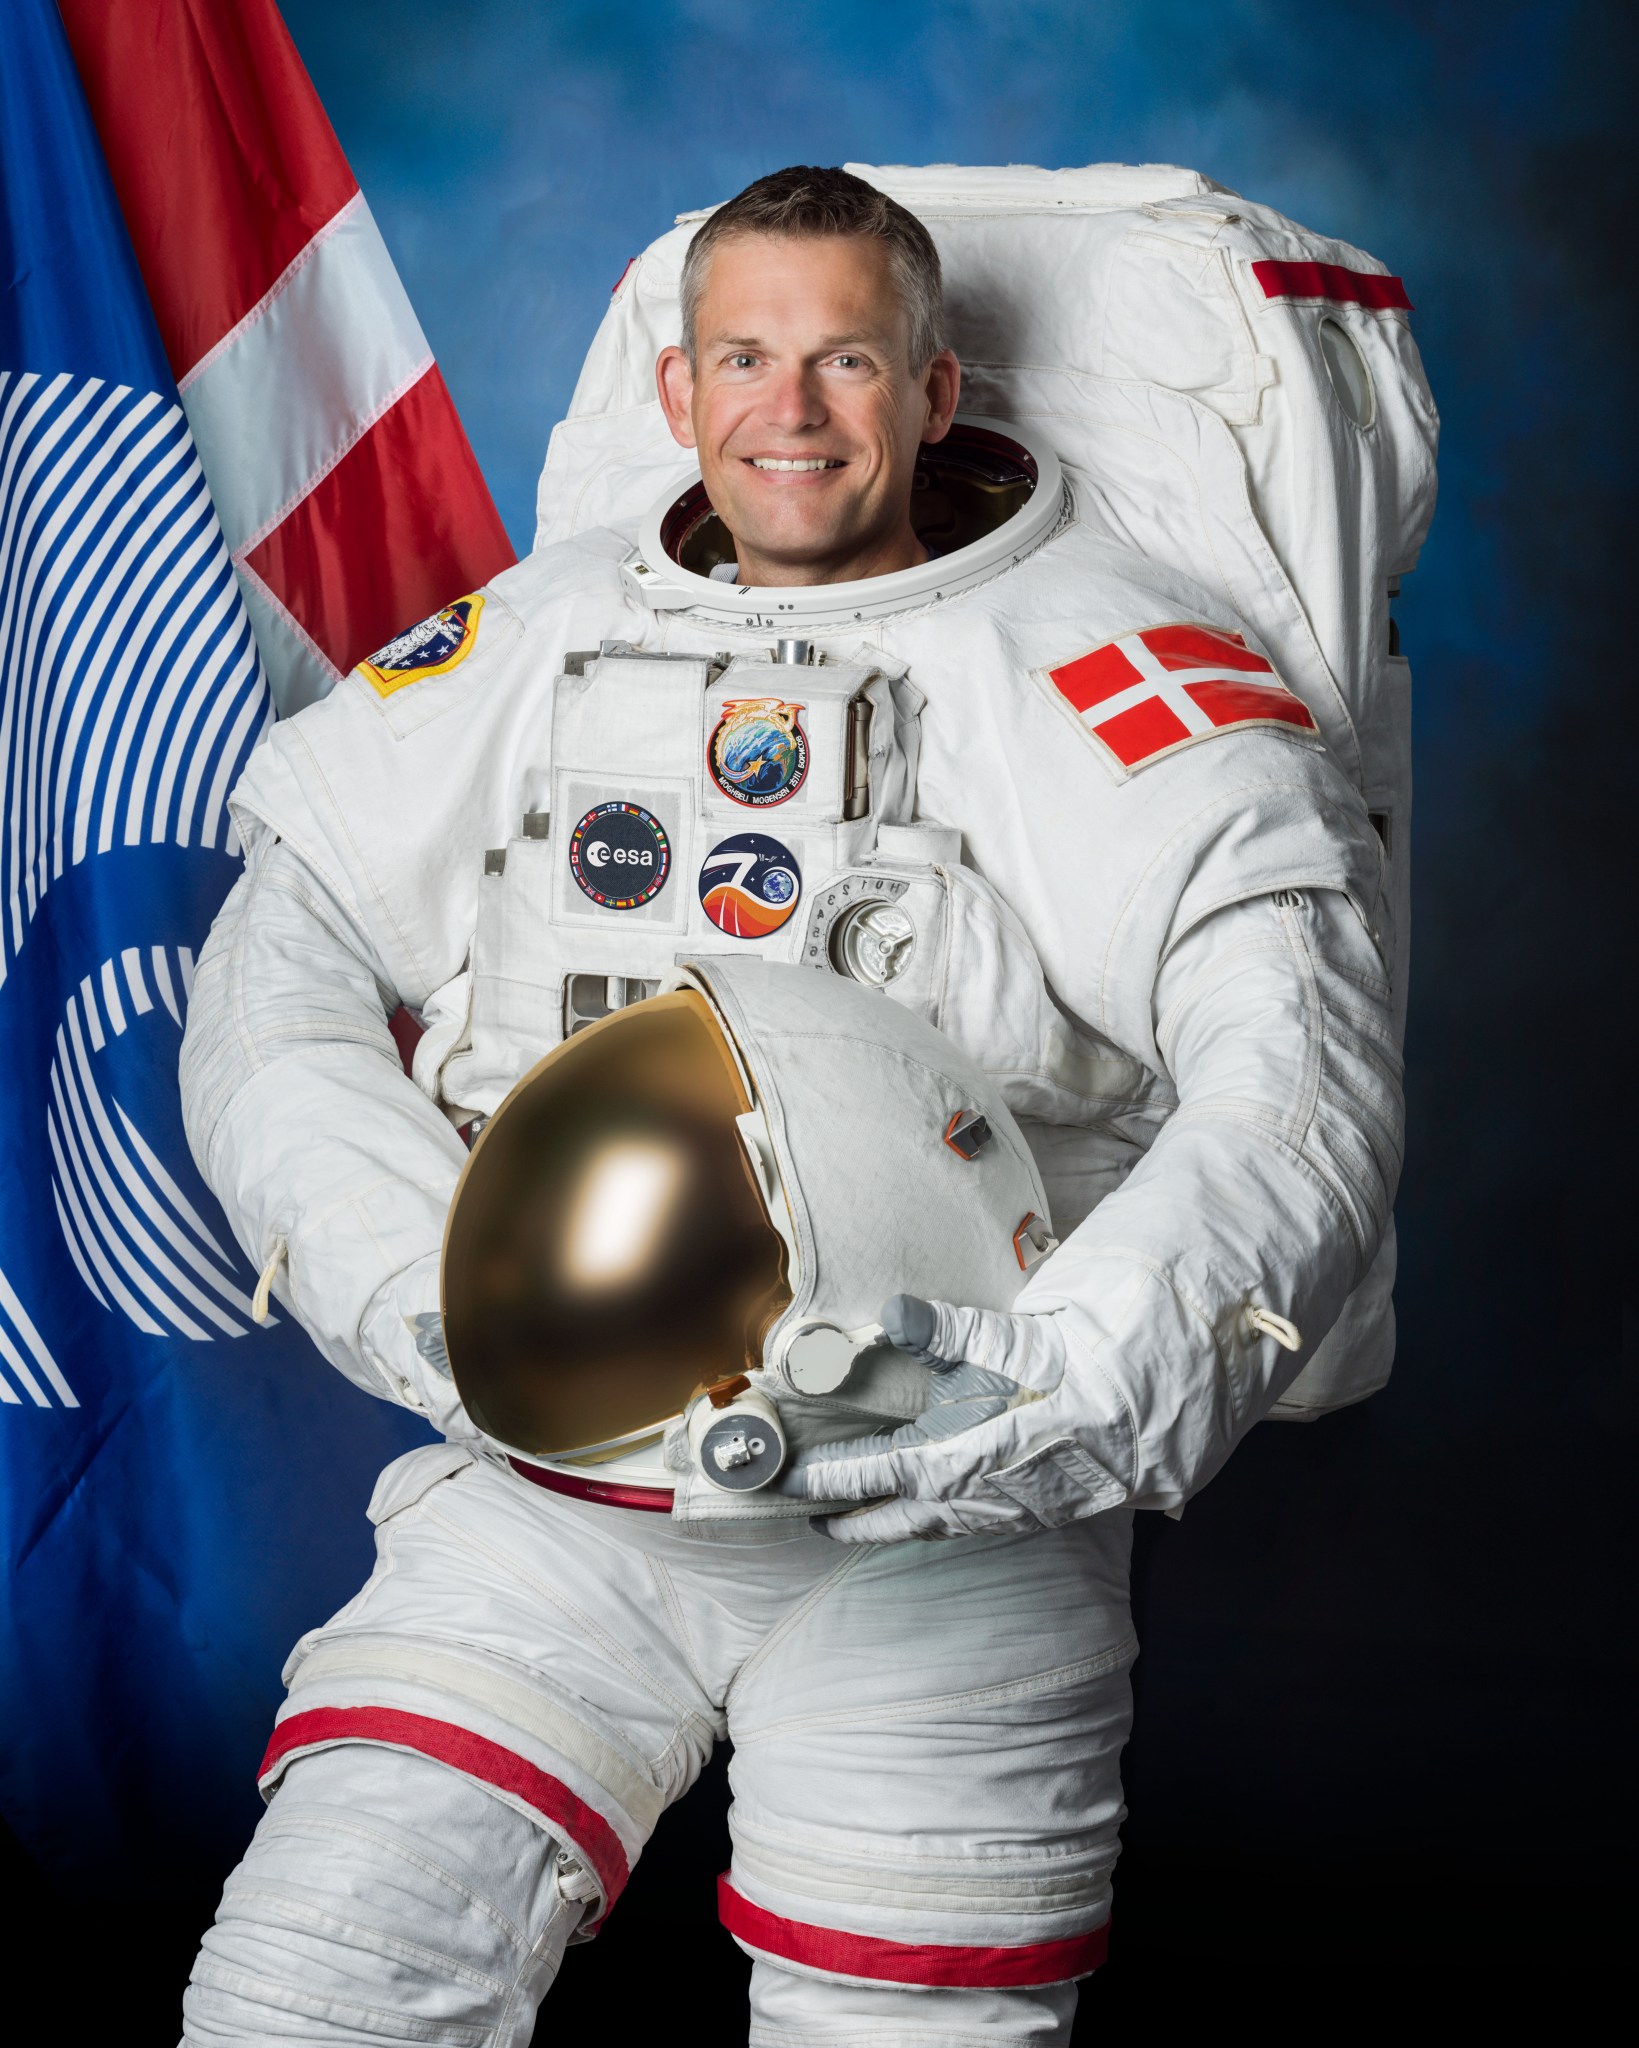 Official portrait of ESA (European Space Agency) astronaut Andreas Mogensen in a spacesuit.